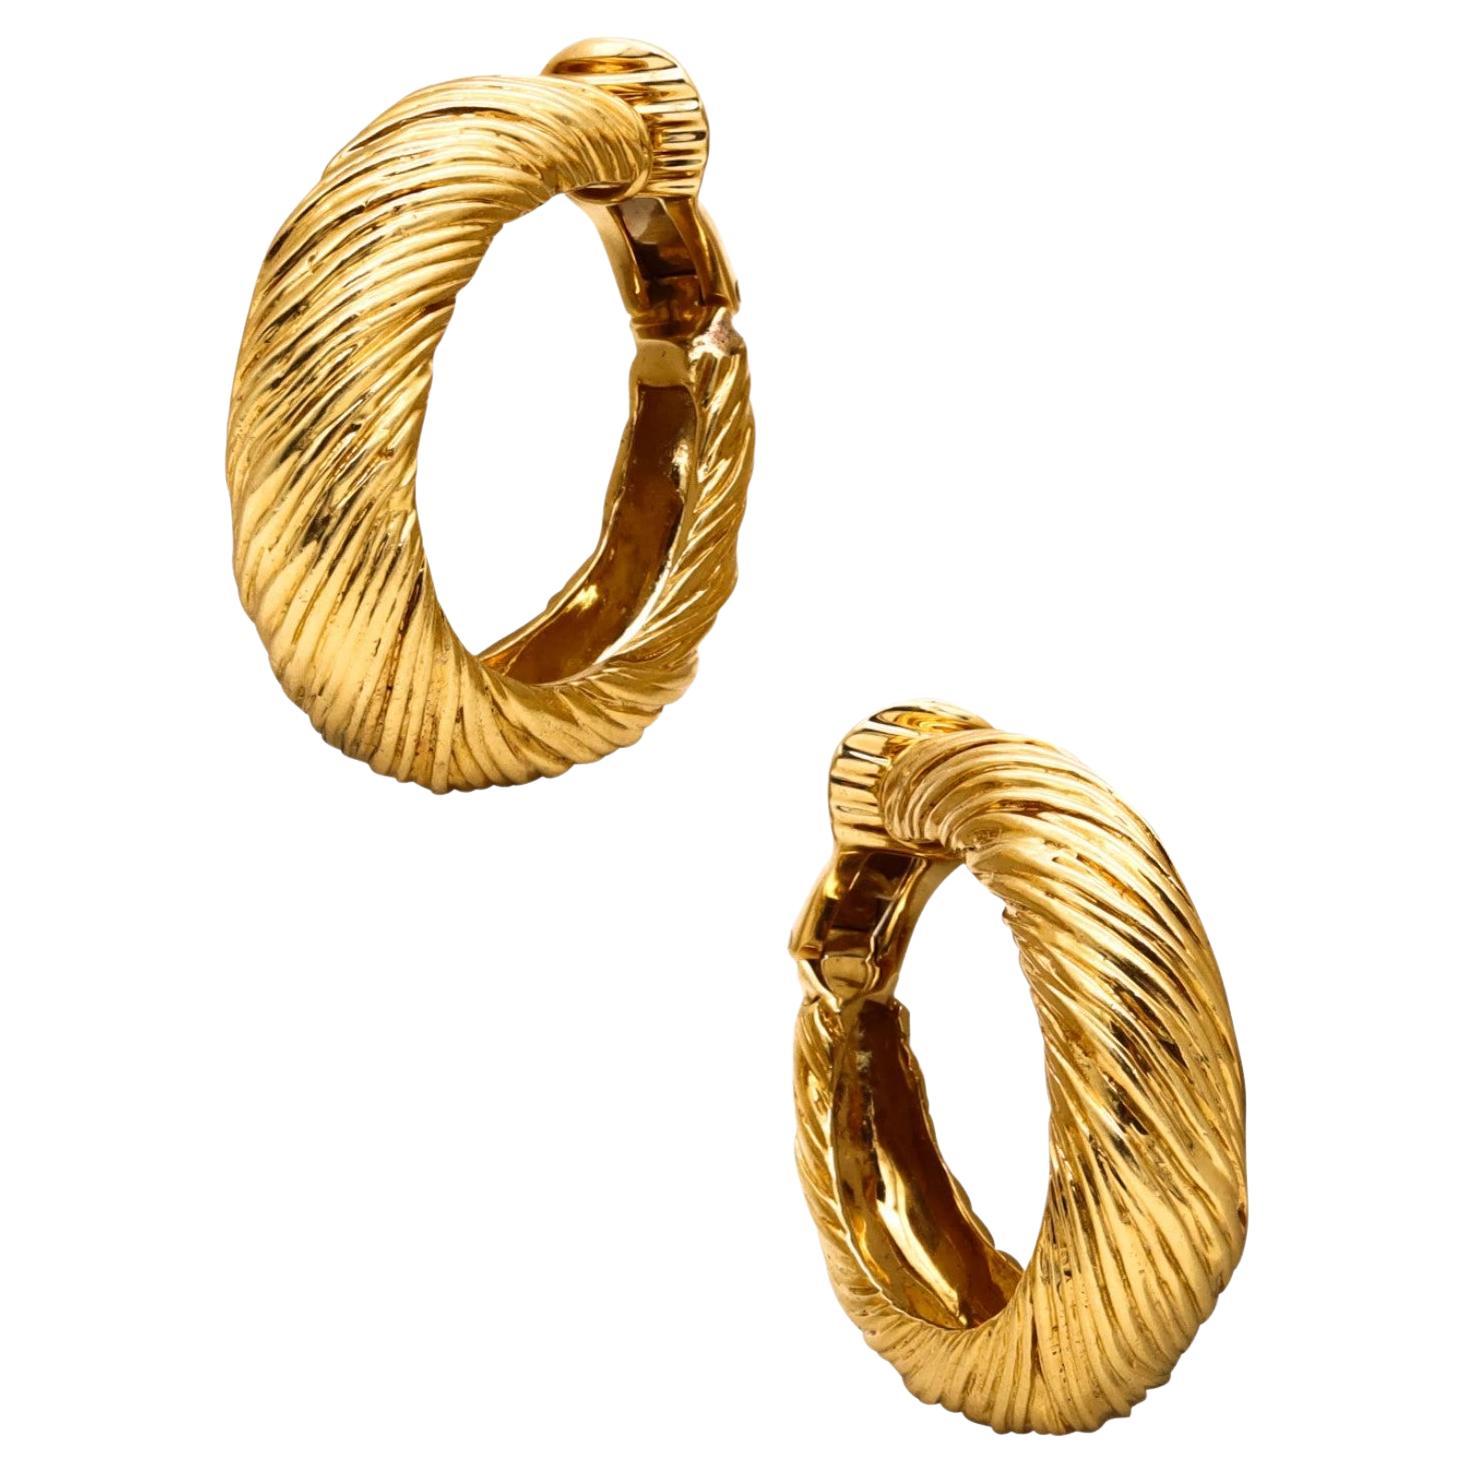 Kutchinsky 1972 British London Textured Large Hoop Earrings In Solid 18Kt Gold For Sale